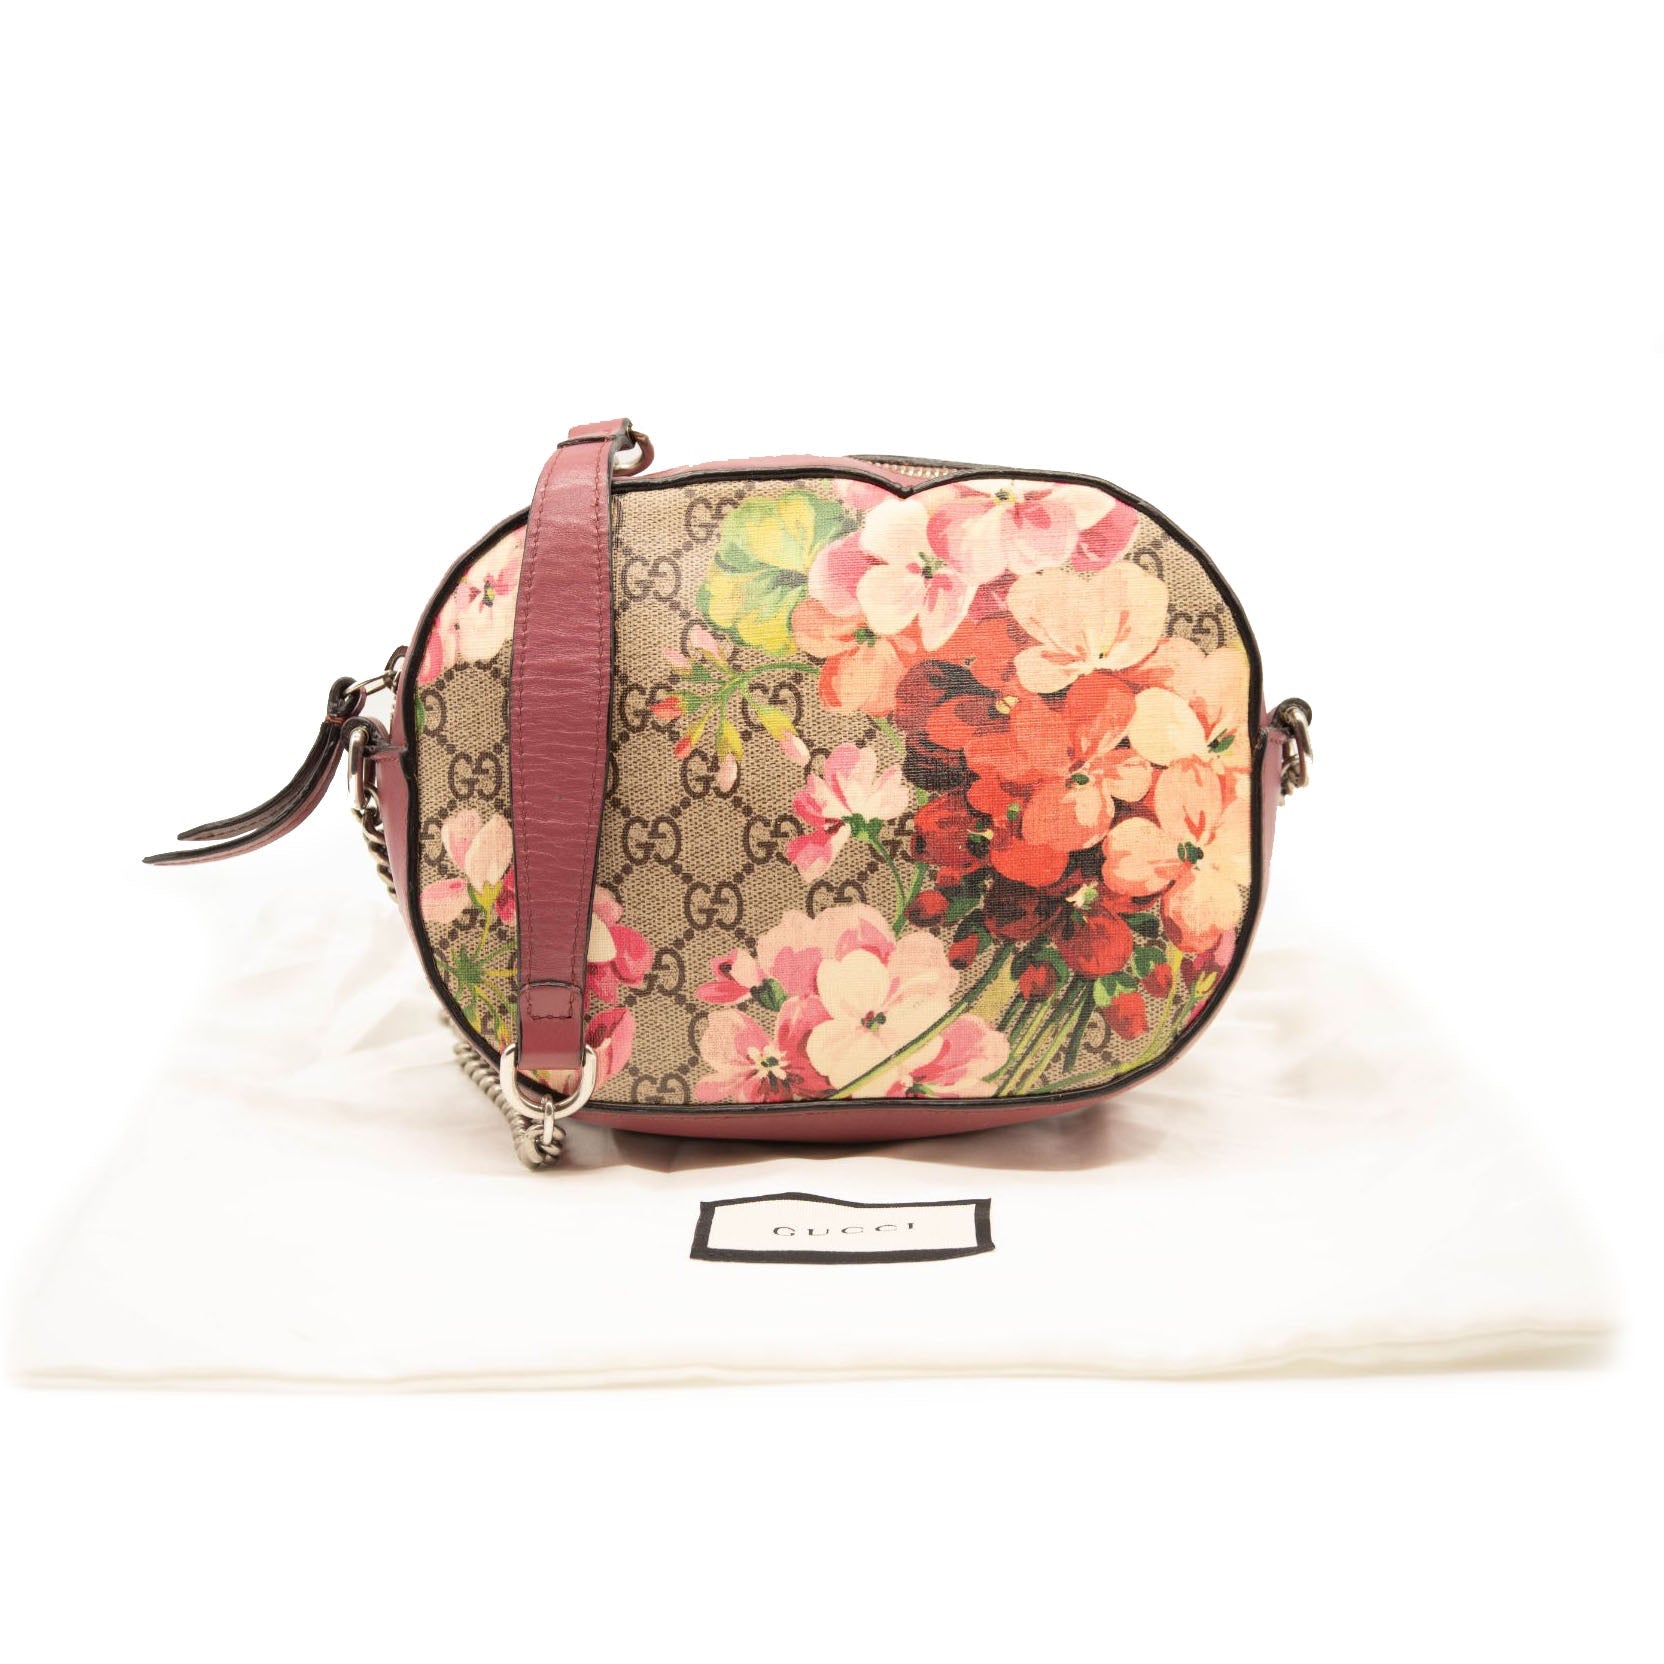 Ophidia GG Floral Leather Coin Purse in Multicoloured - Gucci